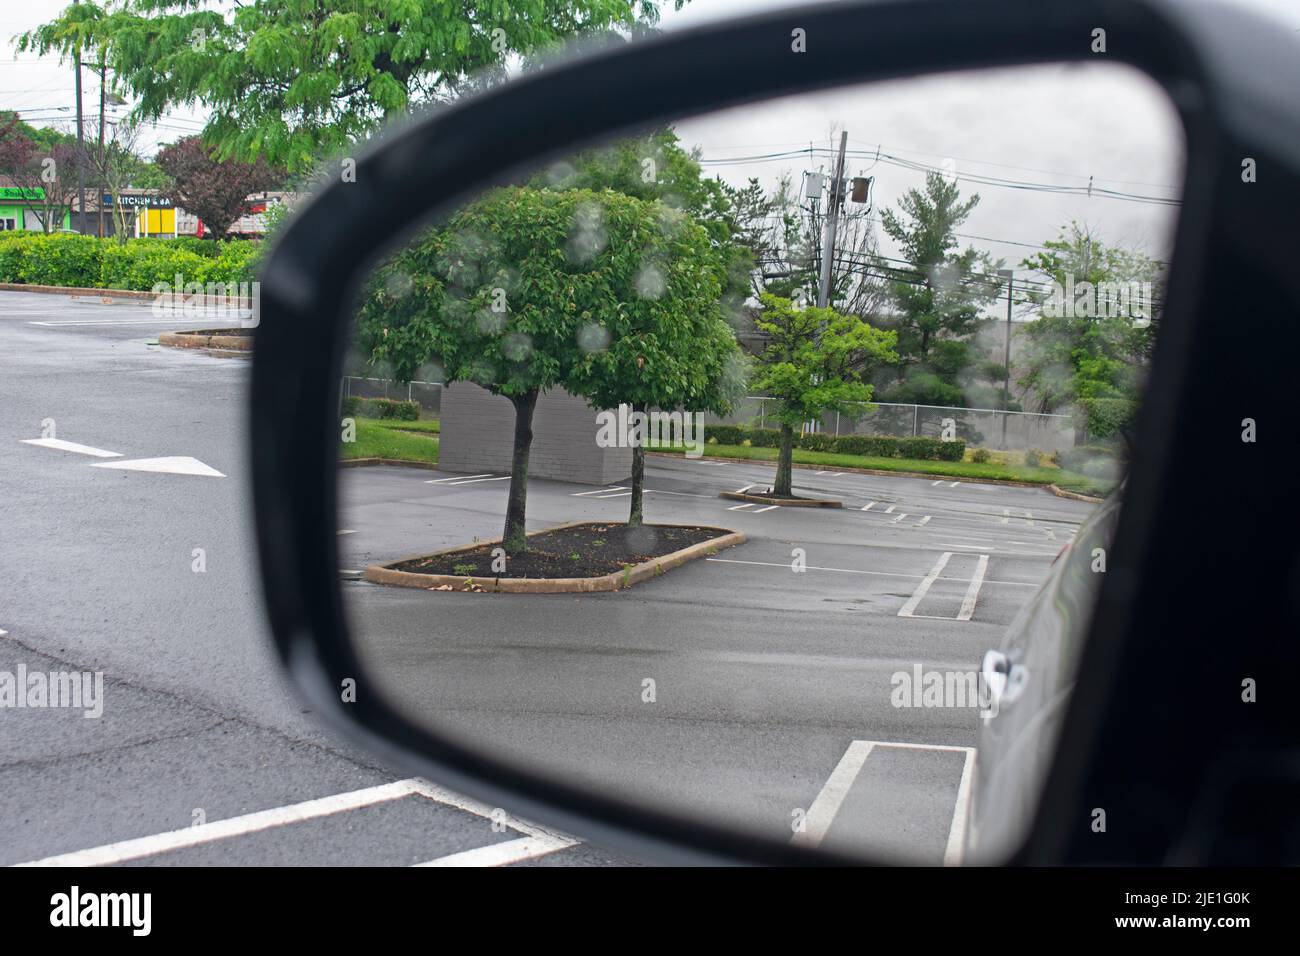 Empty parking spaces at a New Jersey strip mall after a brief downpour viewed through a car's side mirror -02 Stock Photo